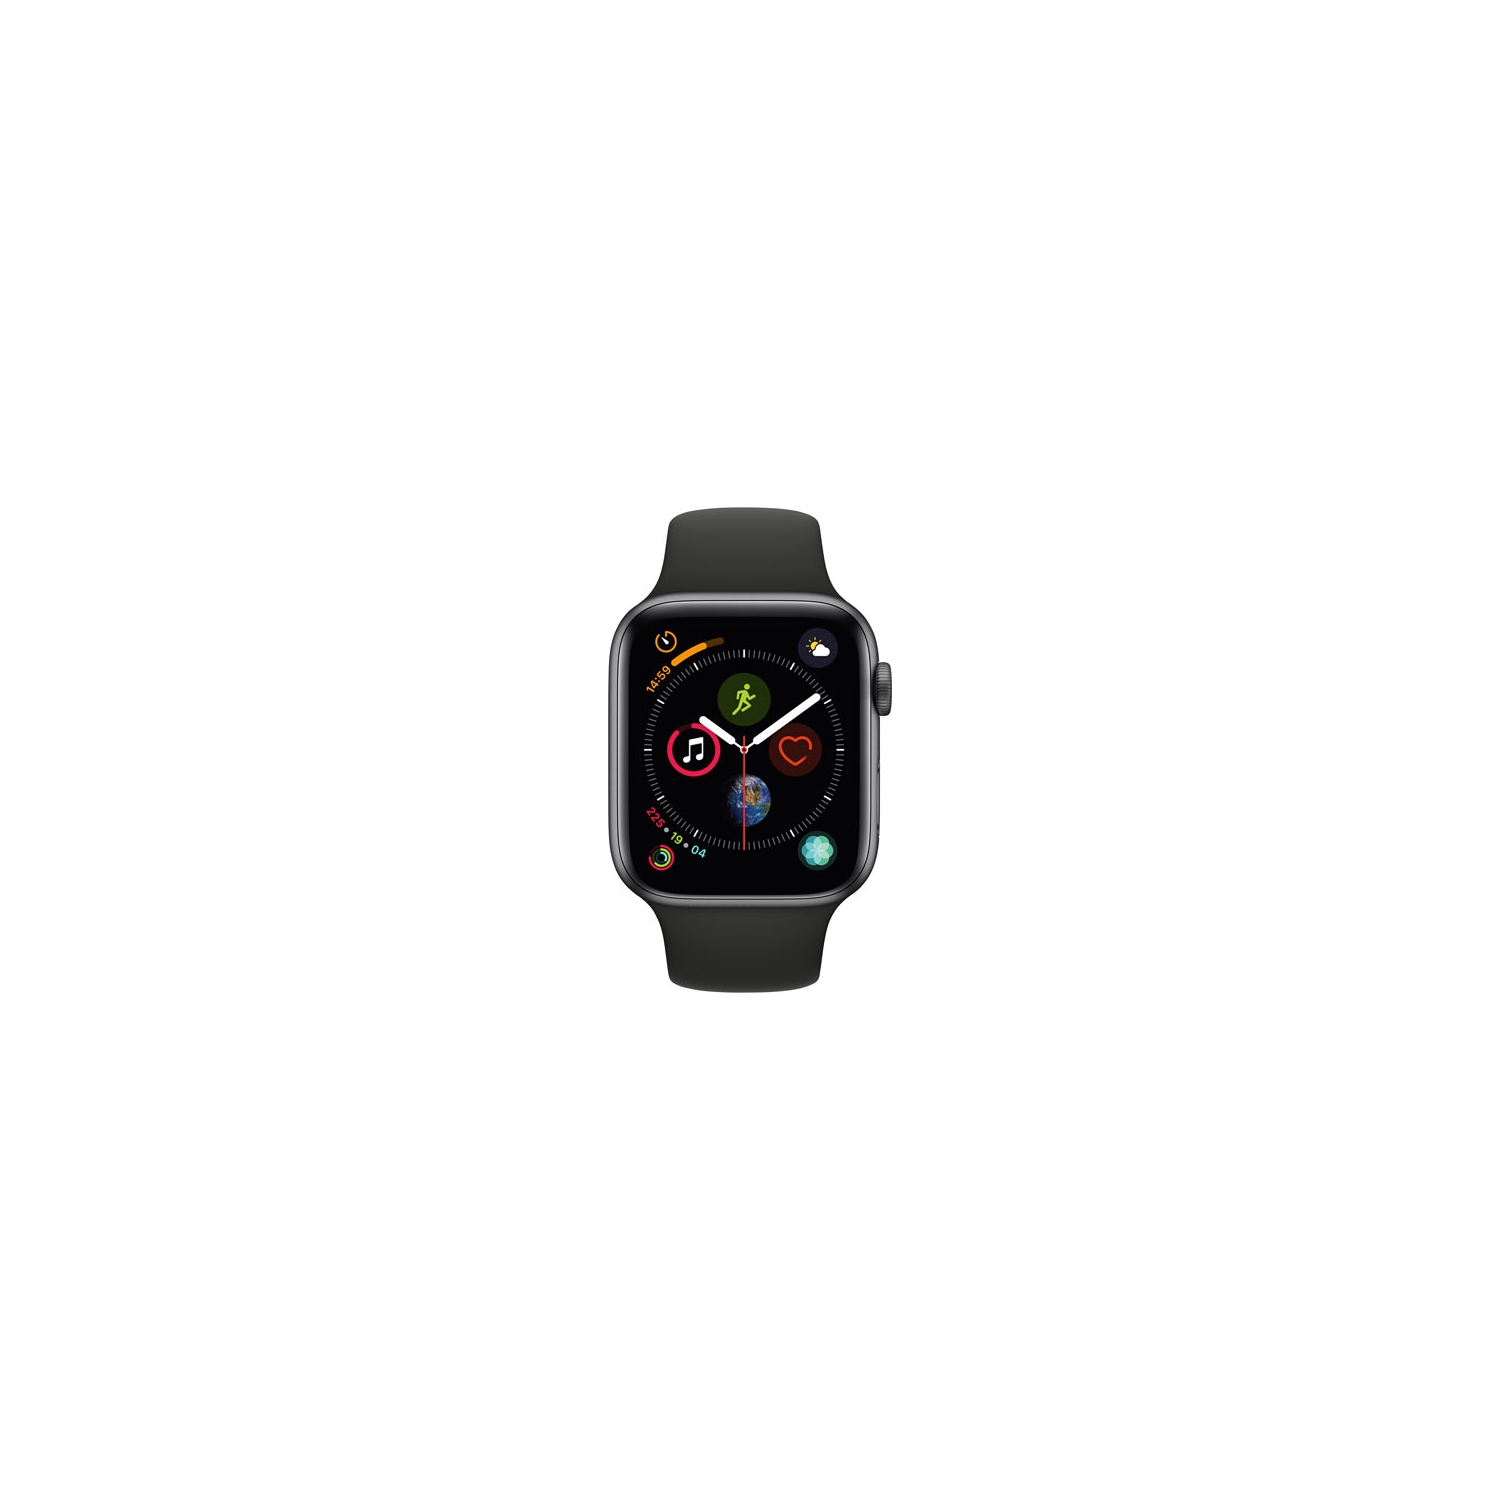 Refurbished (Fair) - Apple Watch Series 4 (GPS) 44mm Space Grey Aluminium Case with Black Sport Band